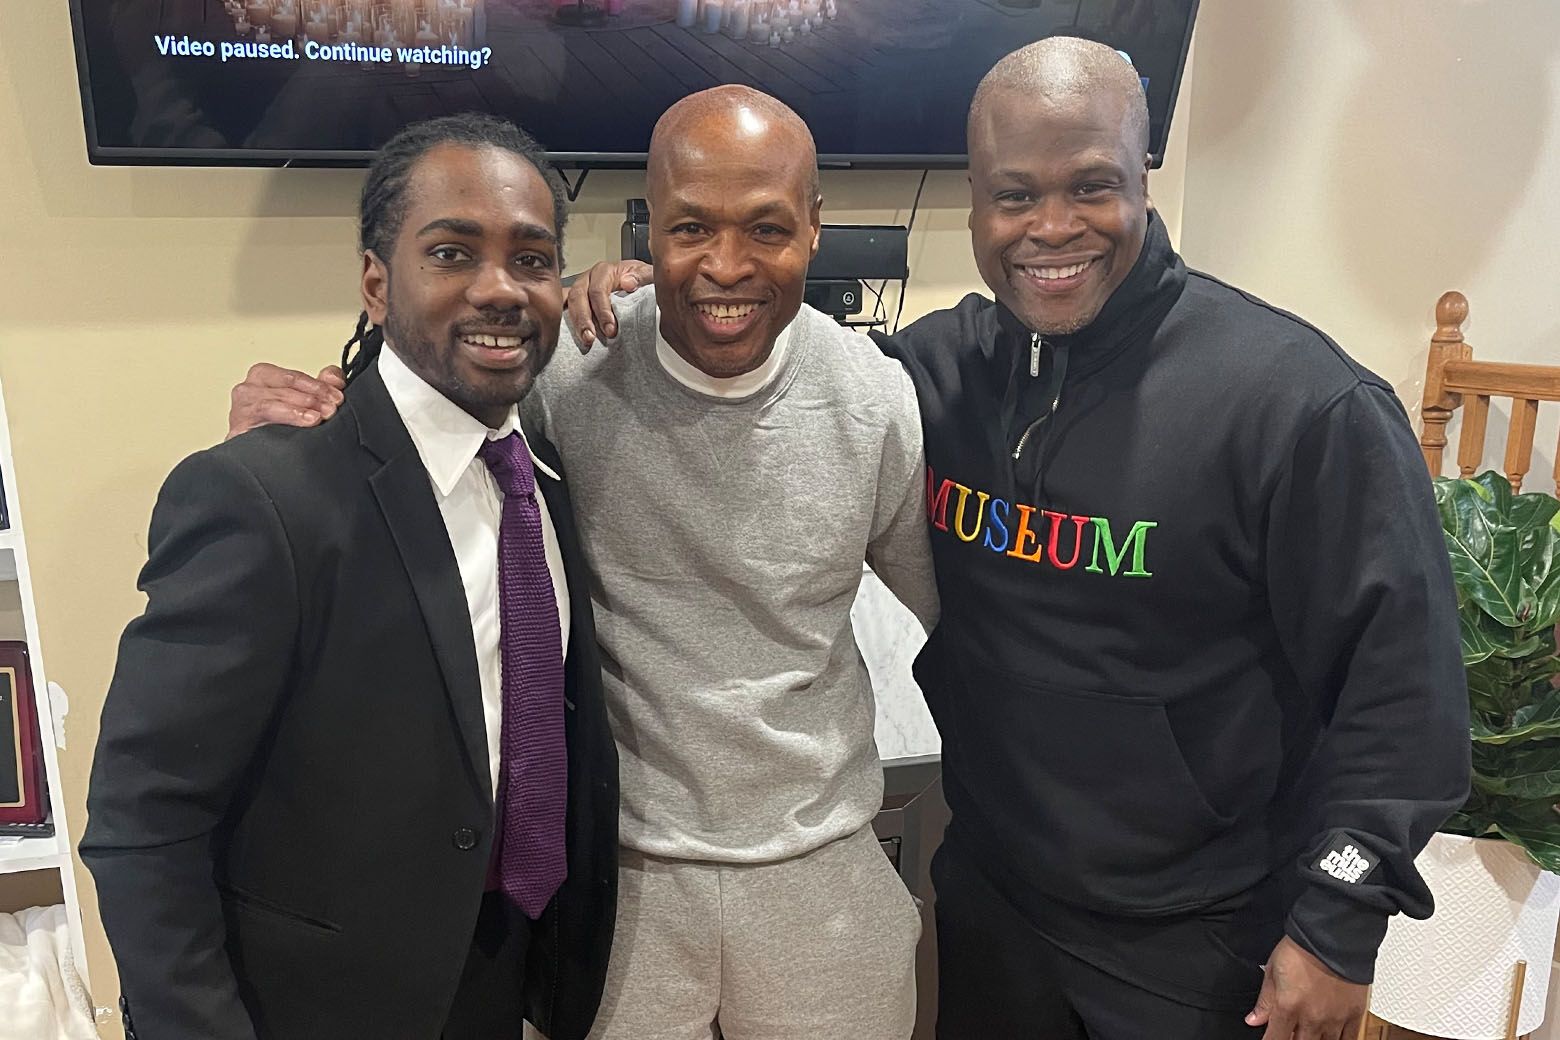 Tony Lewis Sr., pictured center, stands next to his son Tony Lewis Jr., right, and D.C. Ward 8 Council member Trayon White, Sr., left.